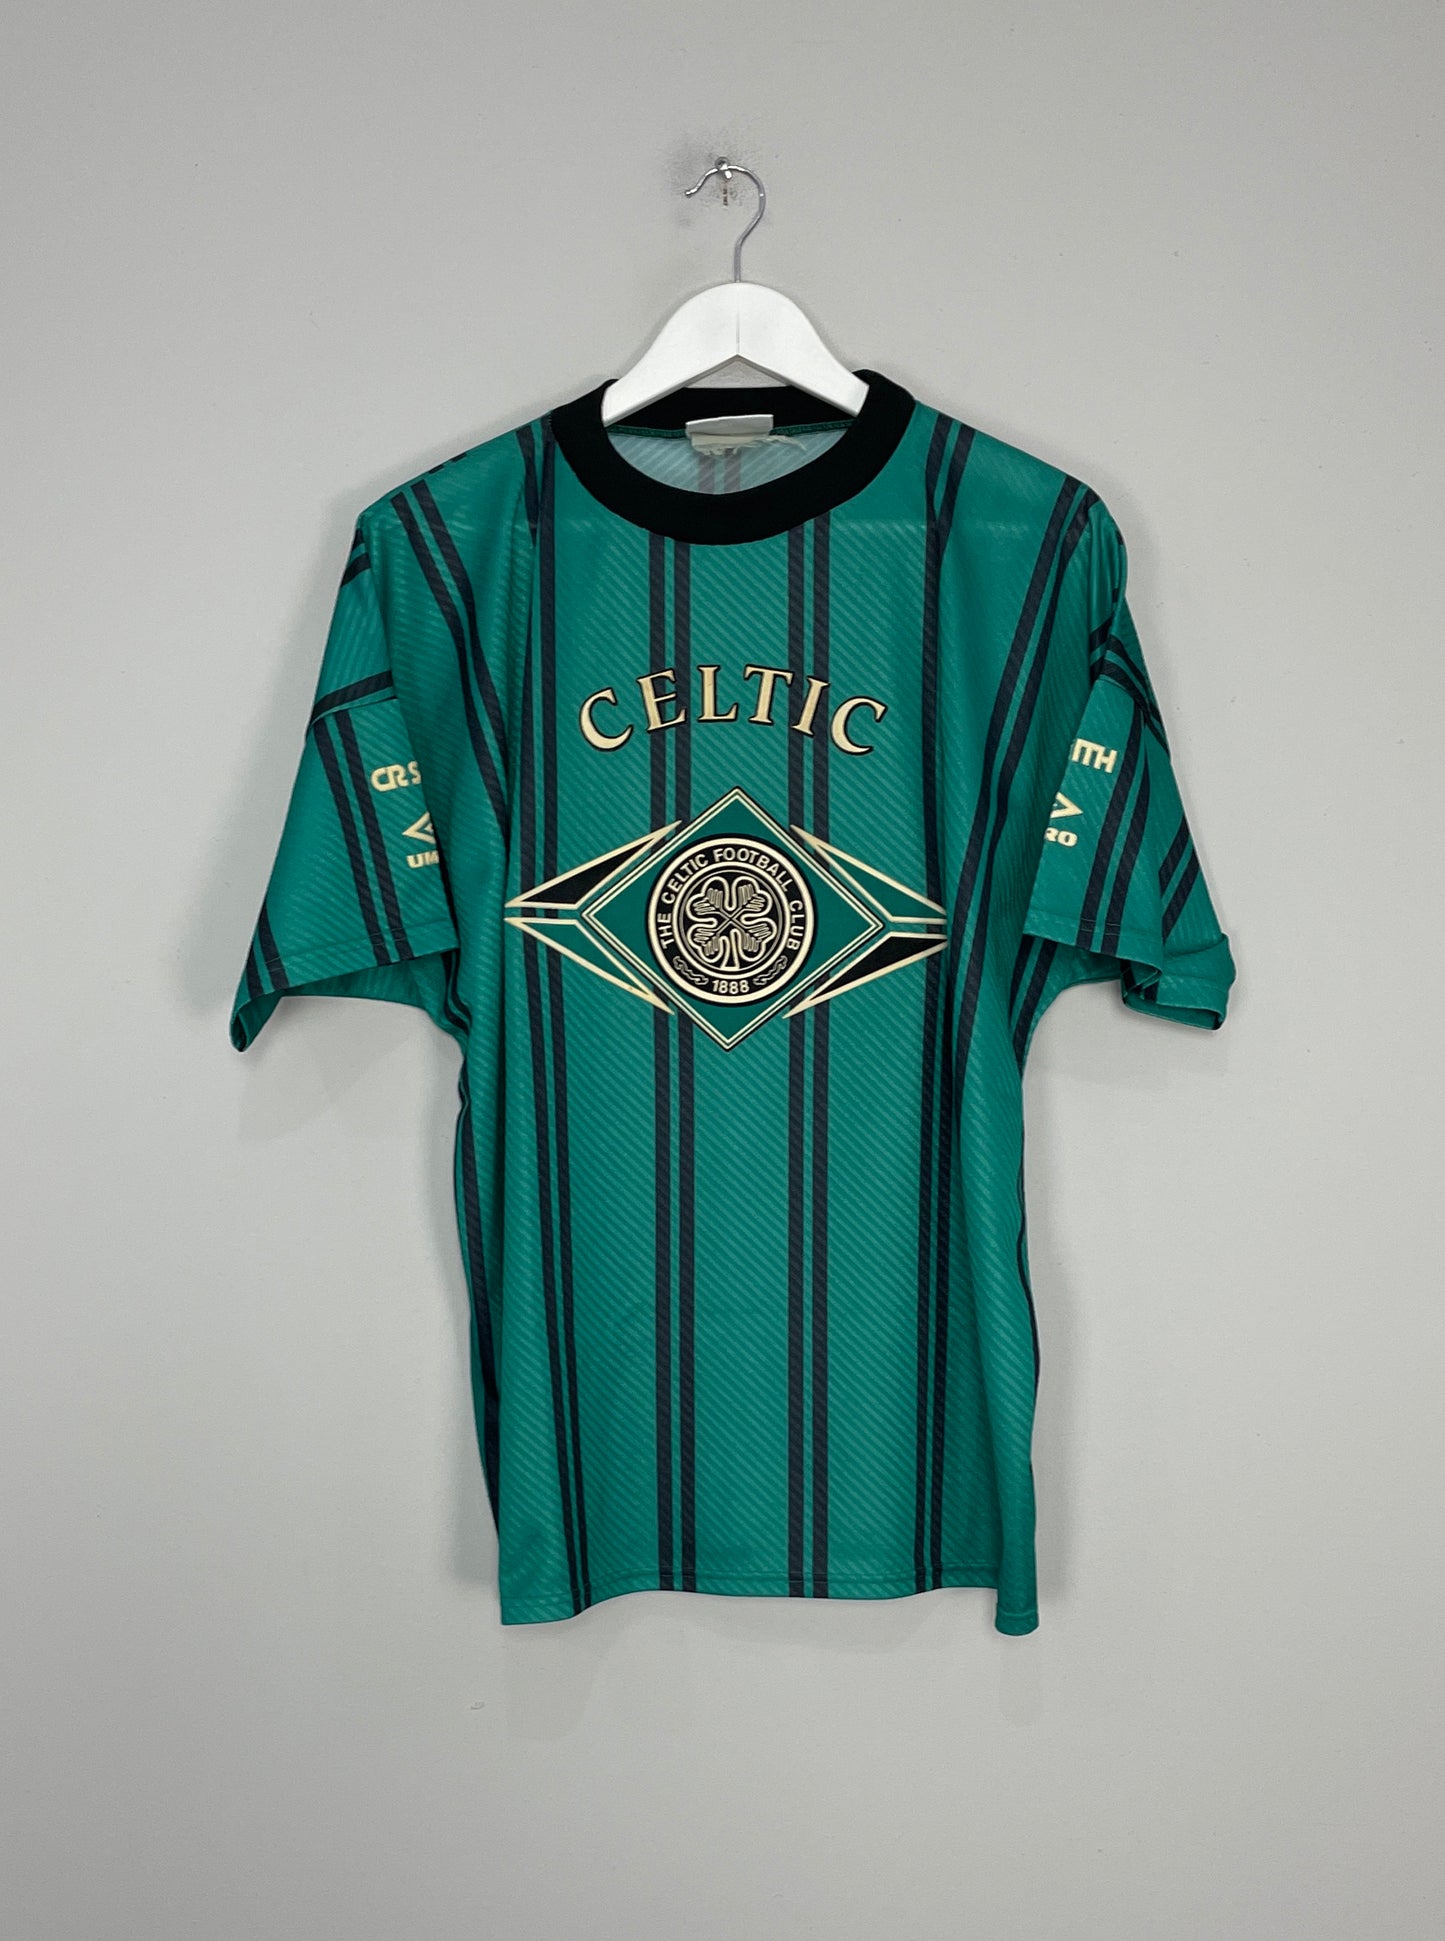 Image of the Celtic training shirt from the 1994/96 season